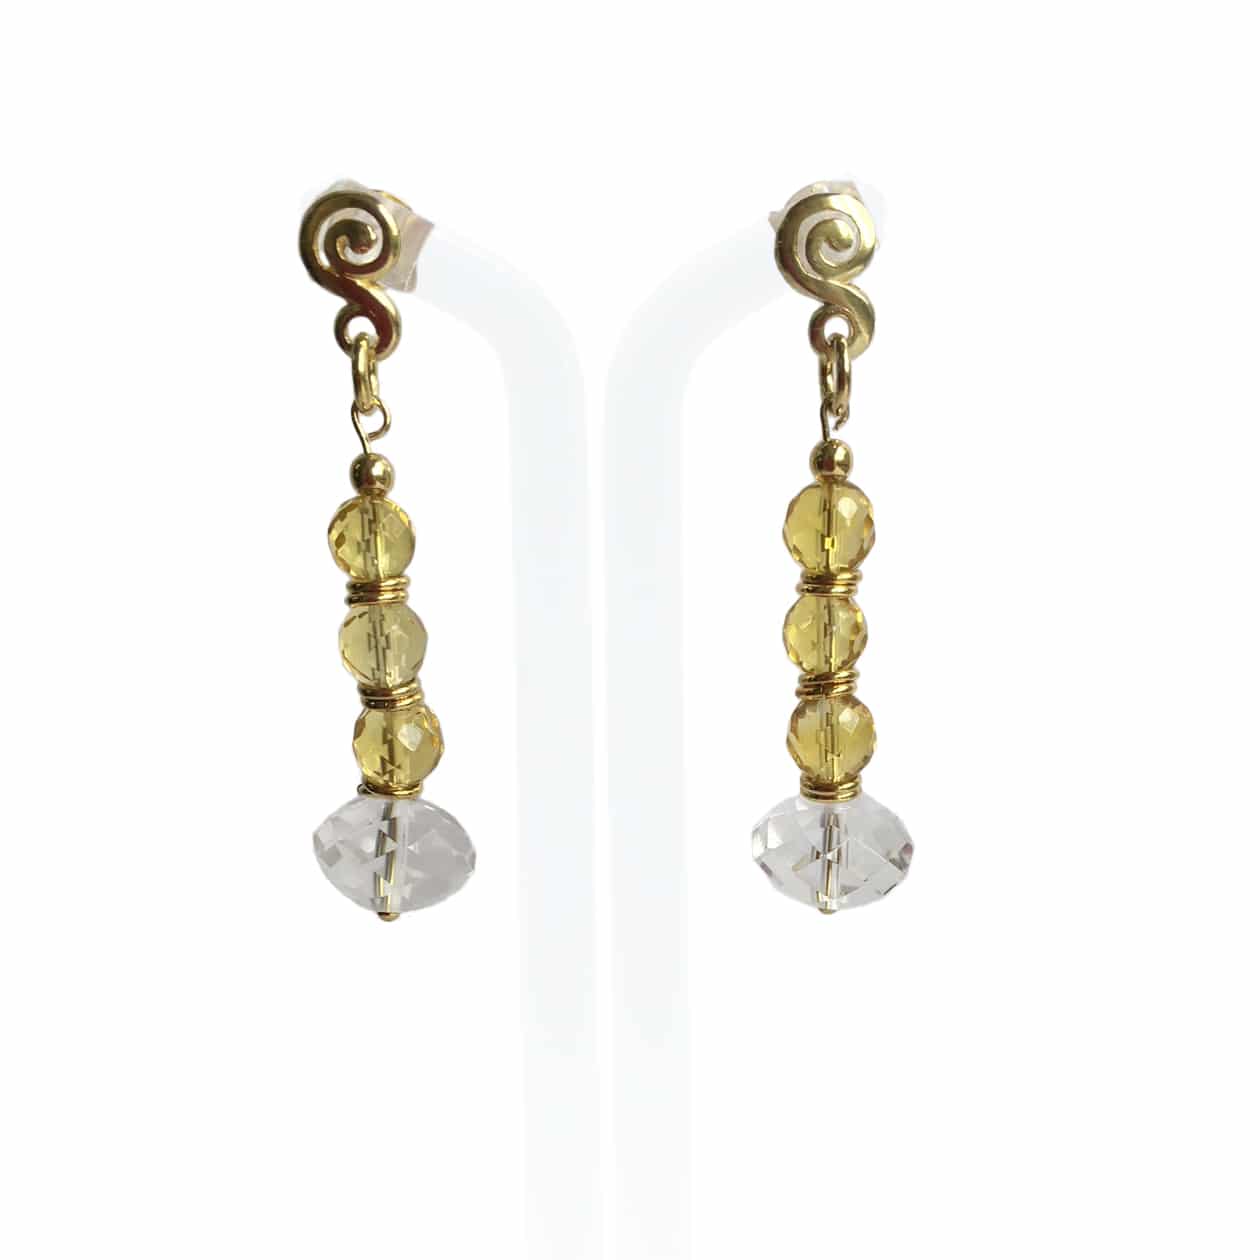 Earrings with citrine, quartz; gold filled and plated silver in 18K gold; handmade.  Exclusive piece.